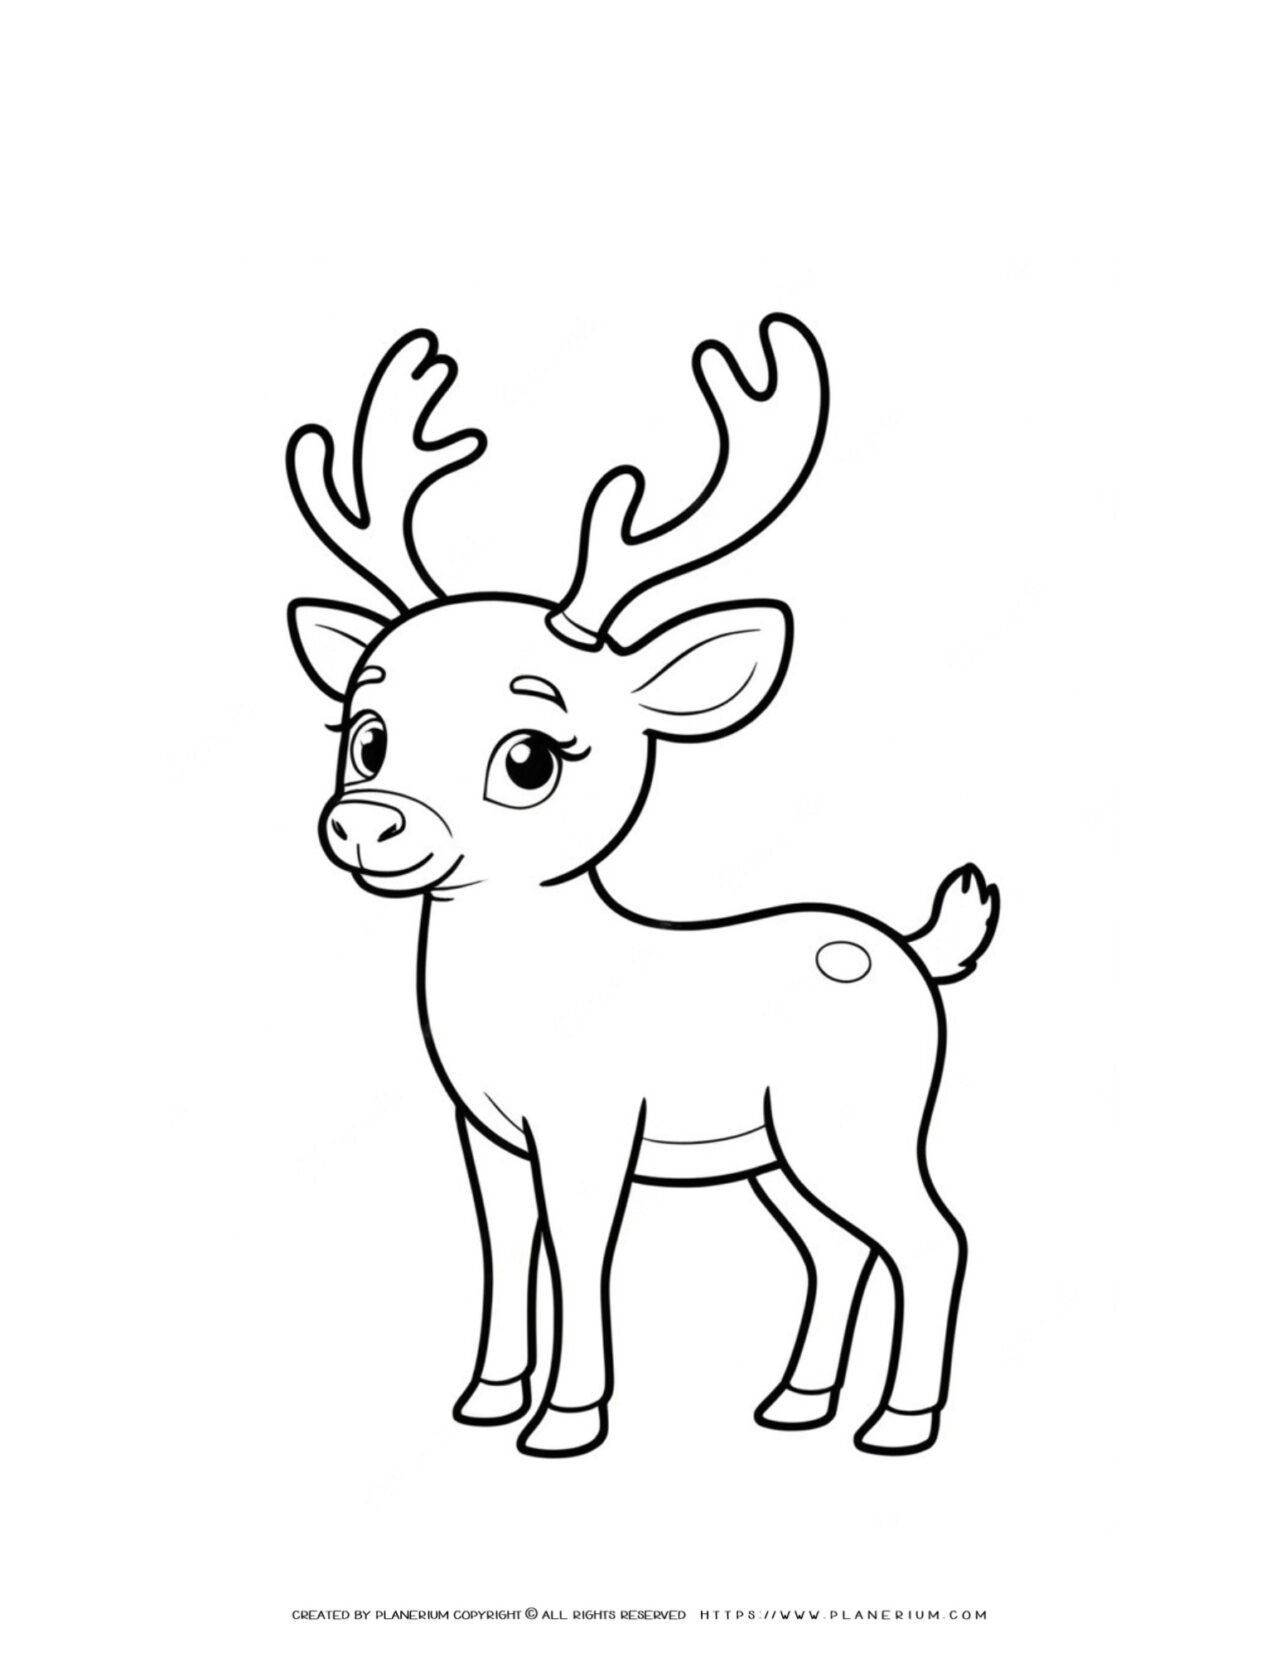 baby-reindeer-animal-coloring-page-for-kids